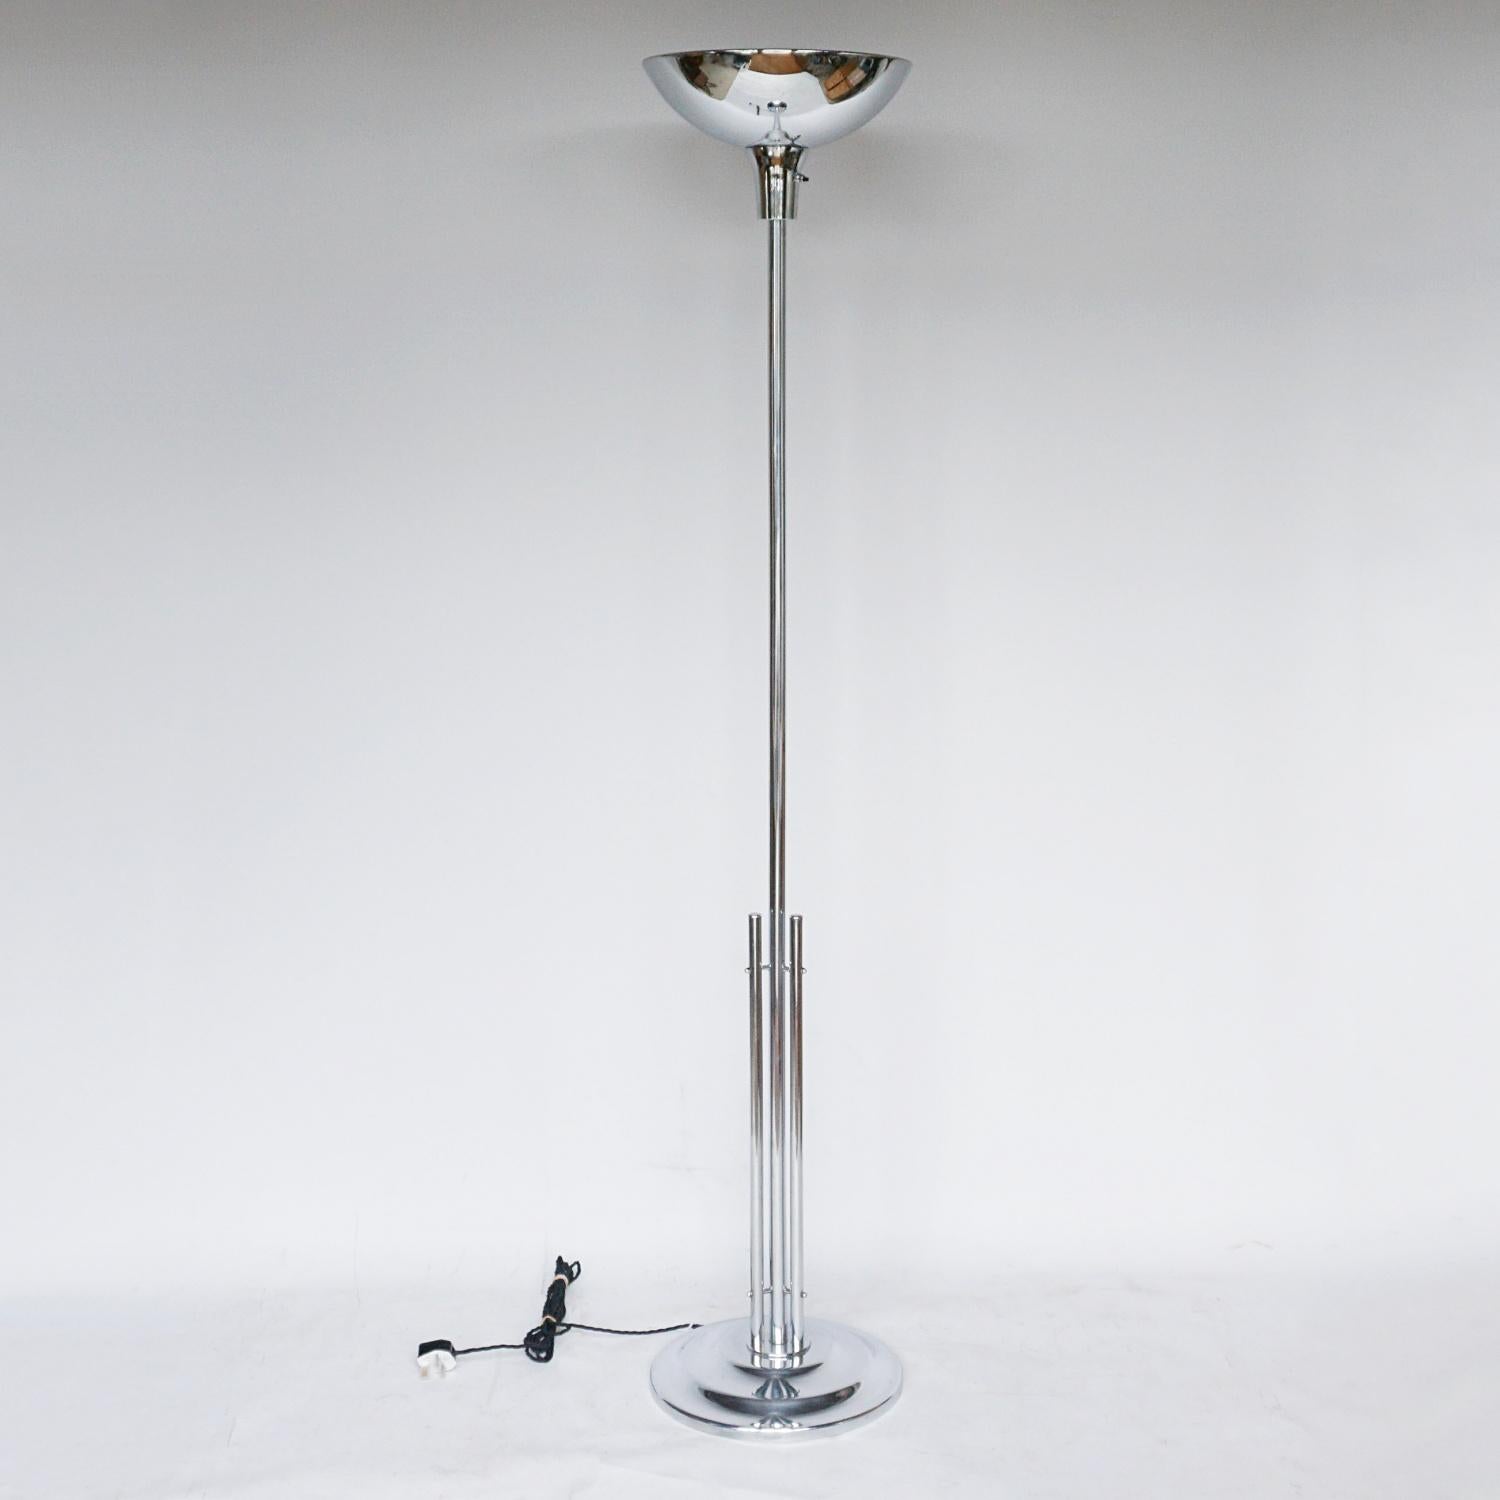 Art Deco Chromed metal uplighter. Clustered rods around a central chromed metal stem. Stepped circular base. 

Dimensions: H 181cm W 36cm 

Origin: English

Item Number: 0903223

All of our lighting is fully refurbished, re-wired, and